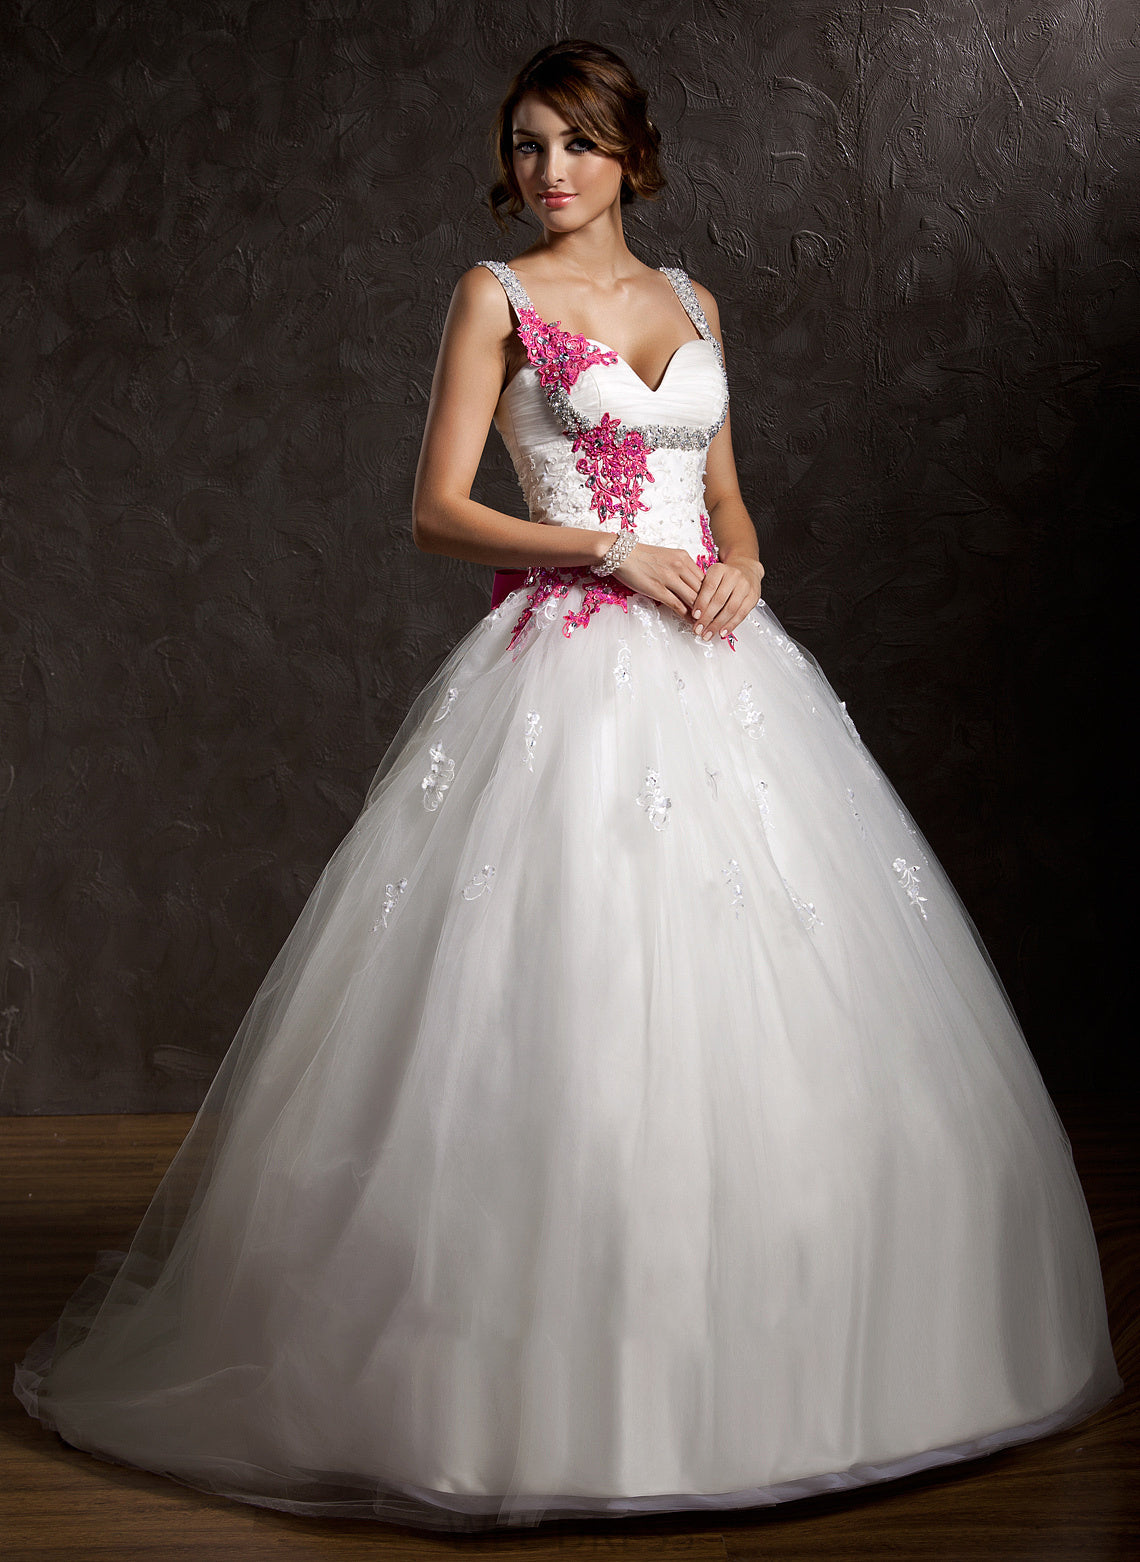 Lace Ruffle Chapel Ball-Gown/Princess Wedding Dresses Dress Sweetheart Wedding Train Appliques Tulle With Bow(s) Kaia